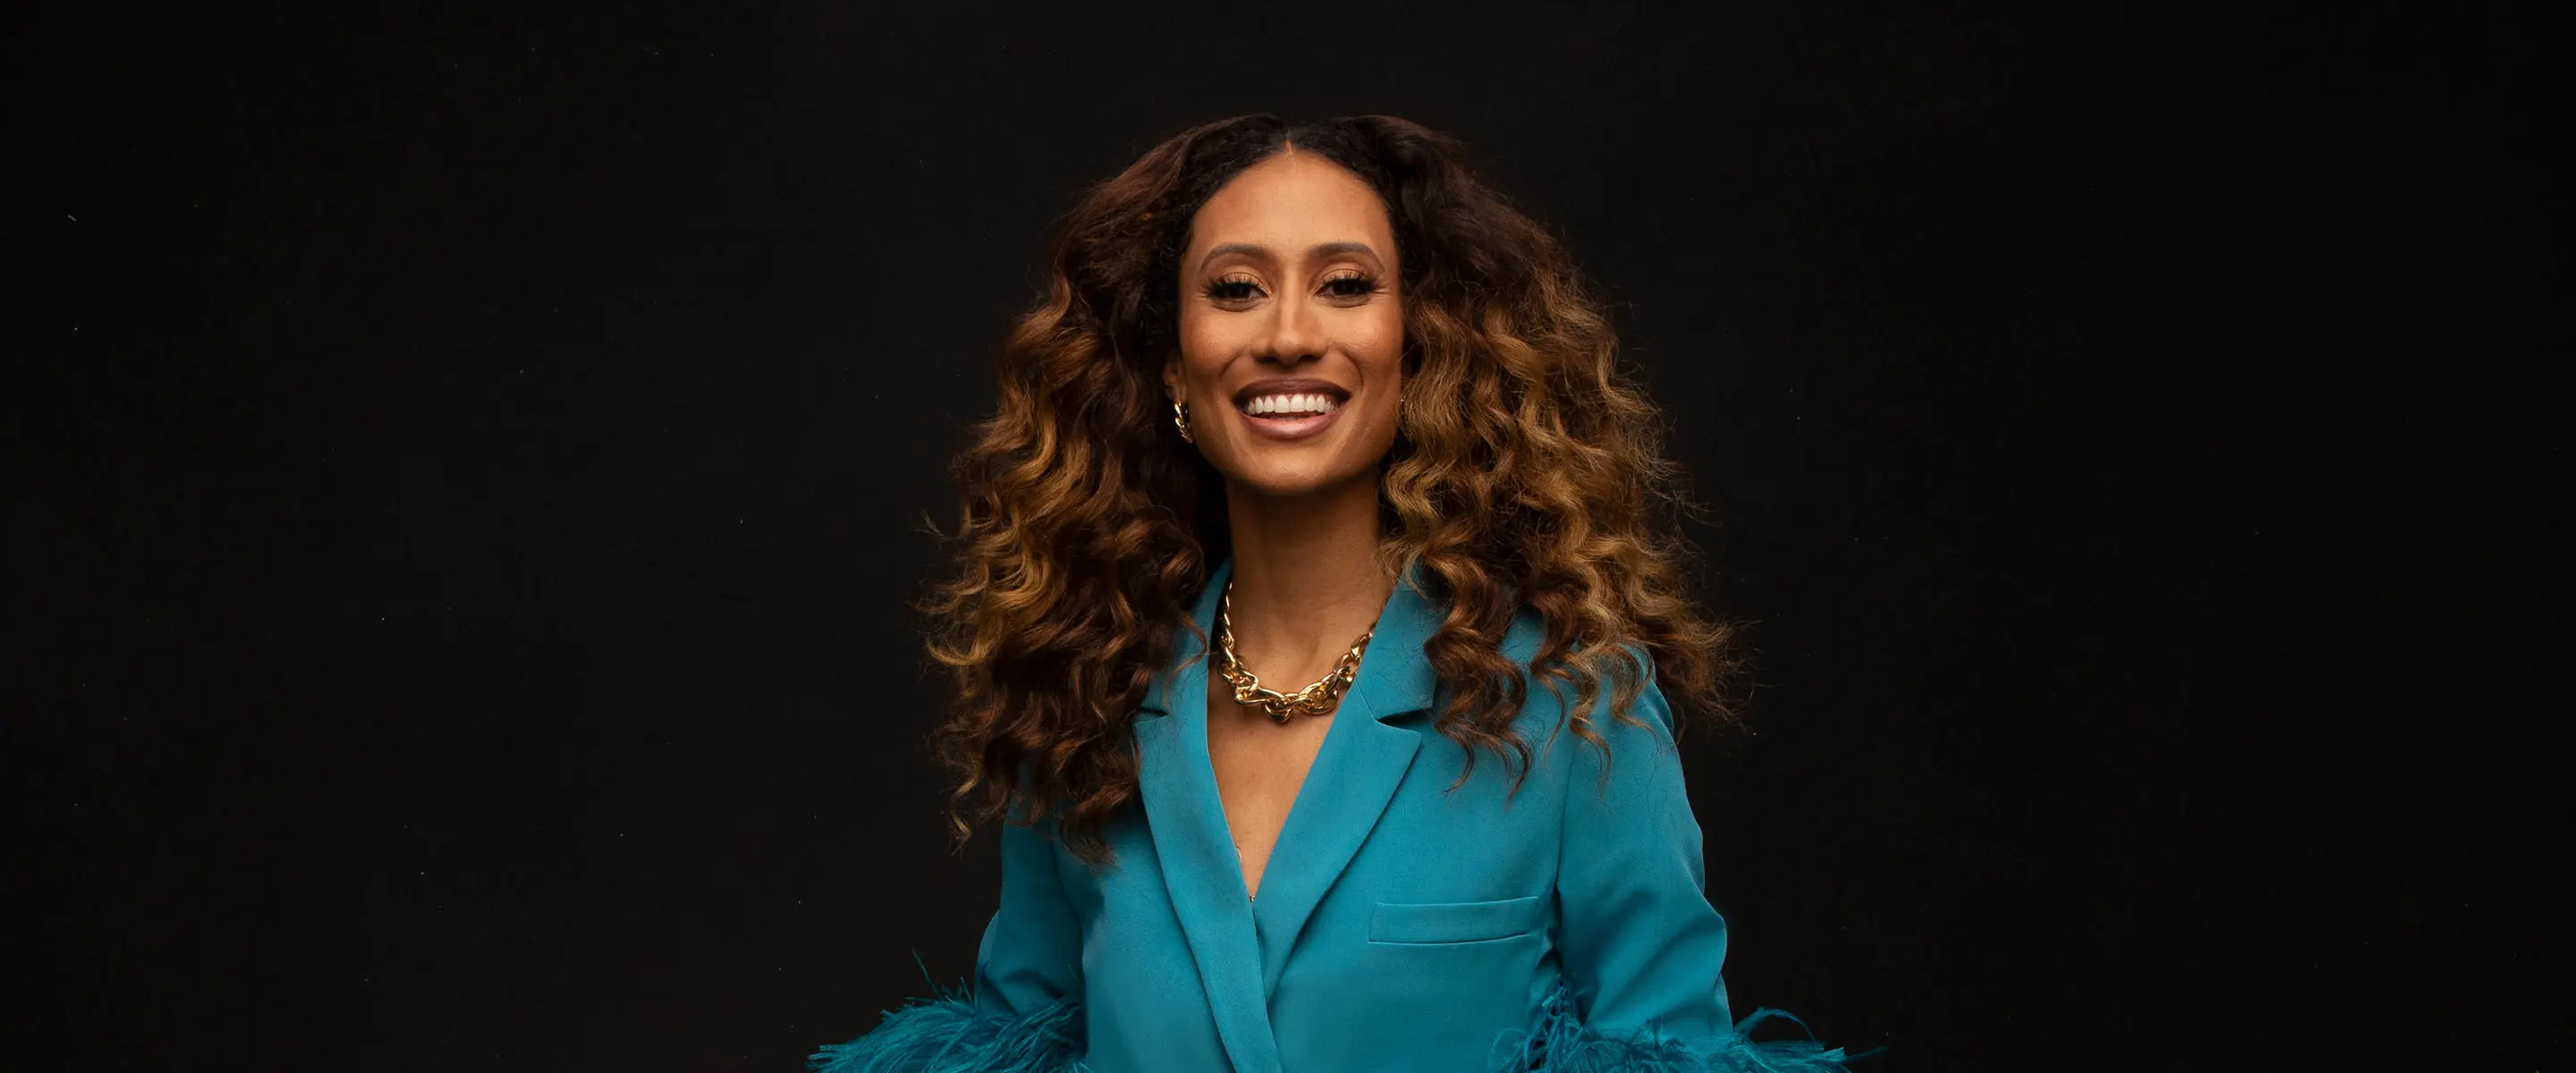 Elaine Welteroth Teaches Designing Your Career